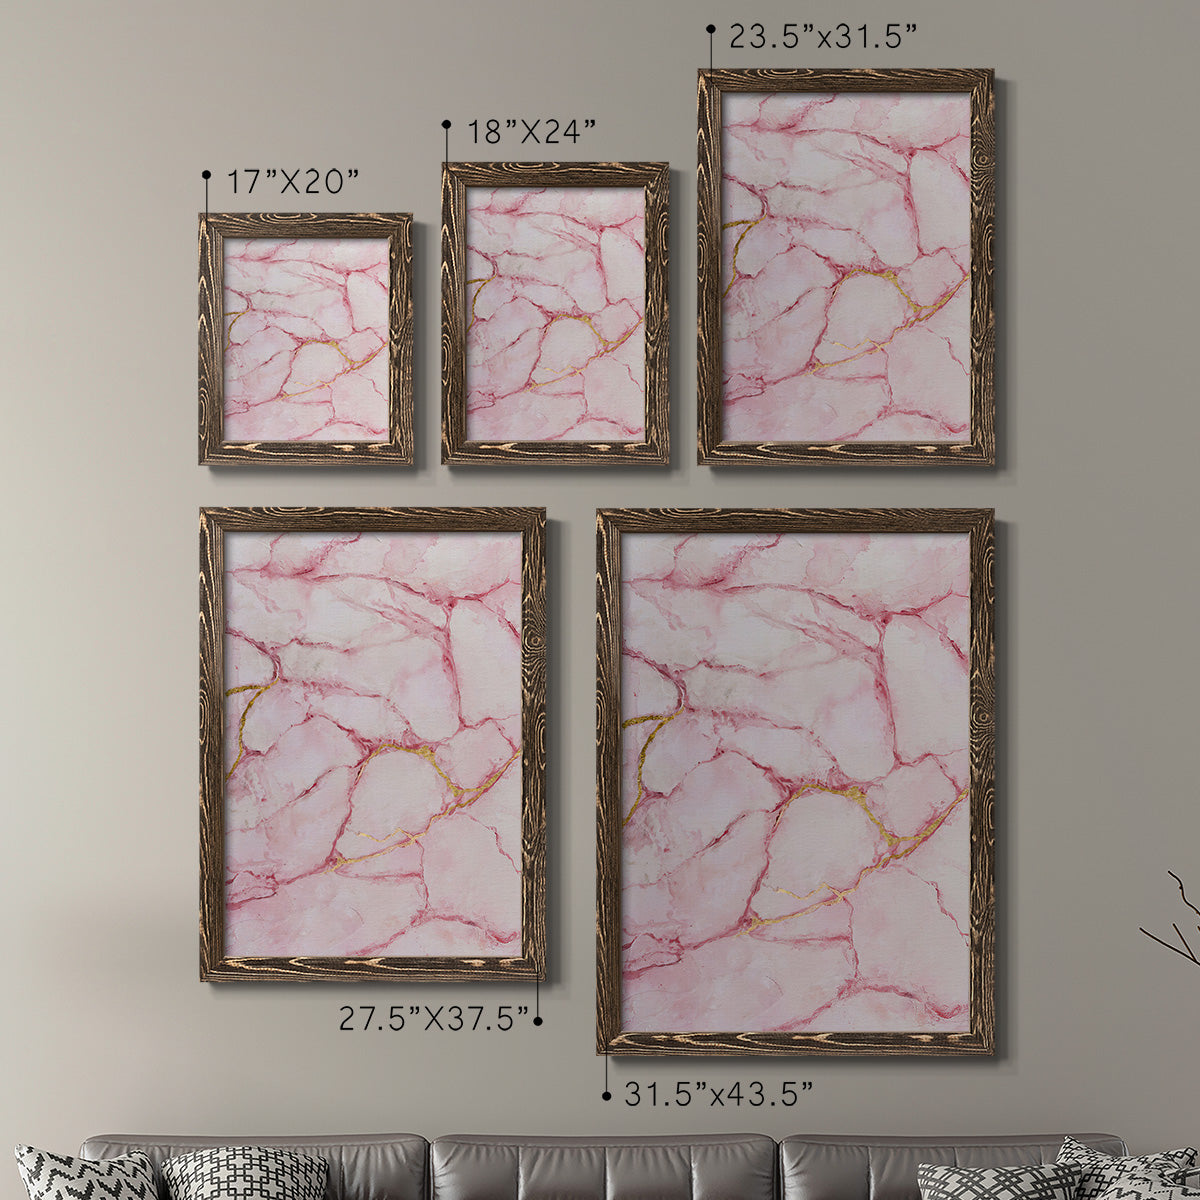 Rose Marble I - Premium Framed Canvas 2 Piece Set - Ready to Hang